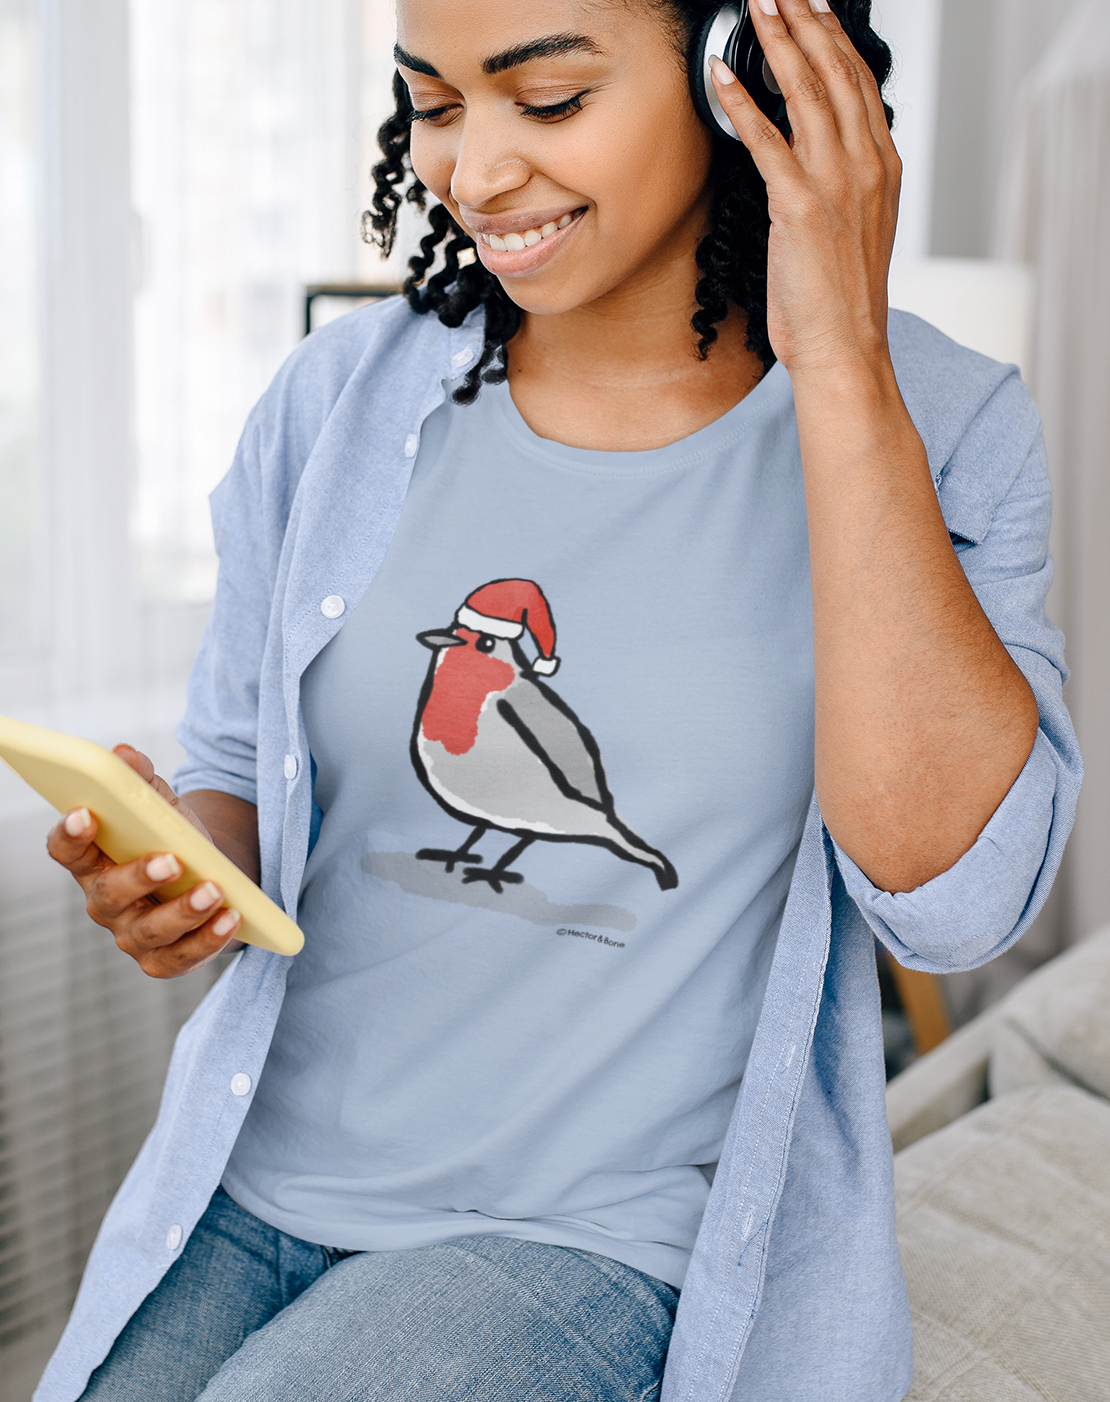 Young woman relaxing at Xmas, wearing a illustrated Santa Christmas Robin T-shirt - Sky Blue colour vegan cotton Christmas T-shirts by Hector and Bone